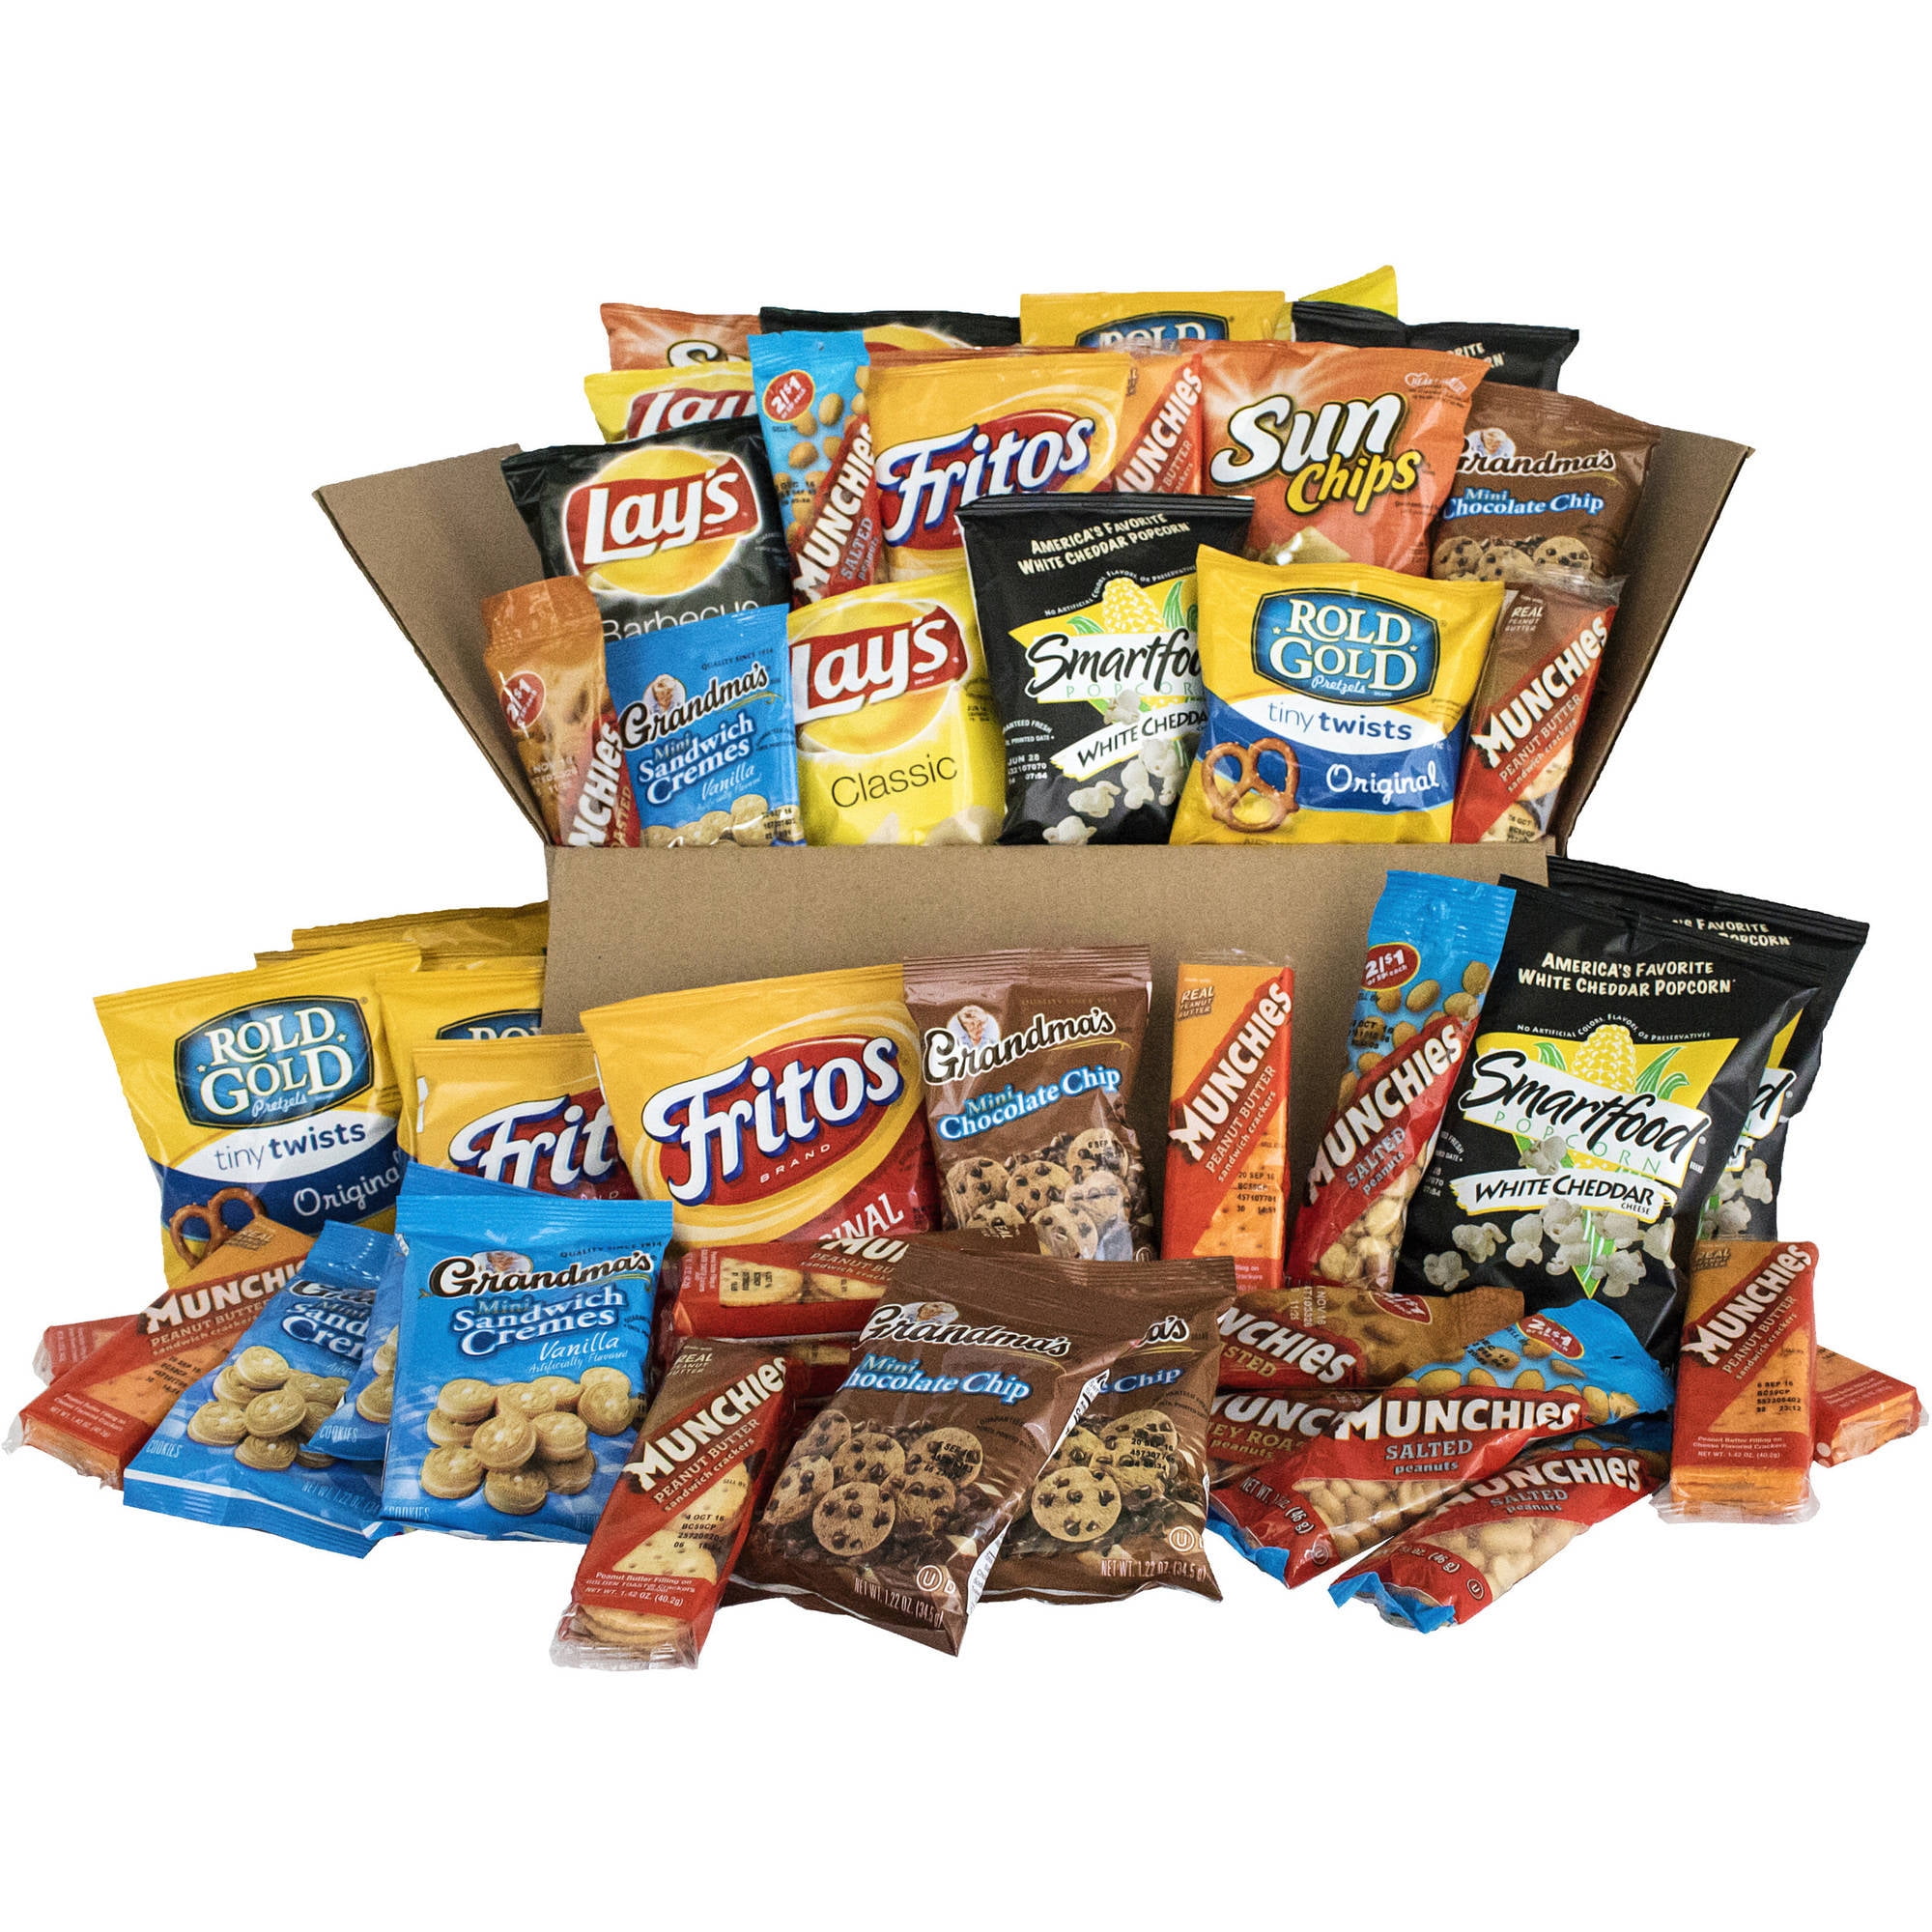 Sweet & Salty Snacks Variety Box, Crackers, Chips & Nuts, 50 Ct